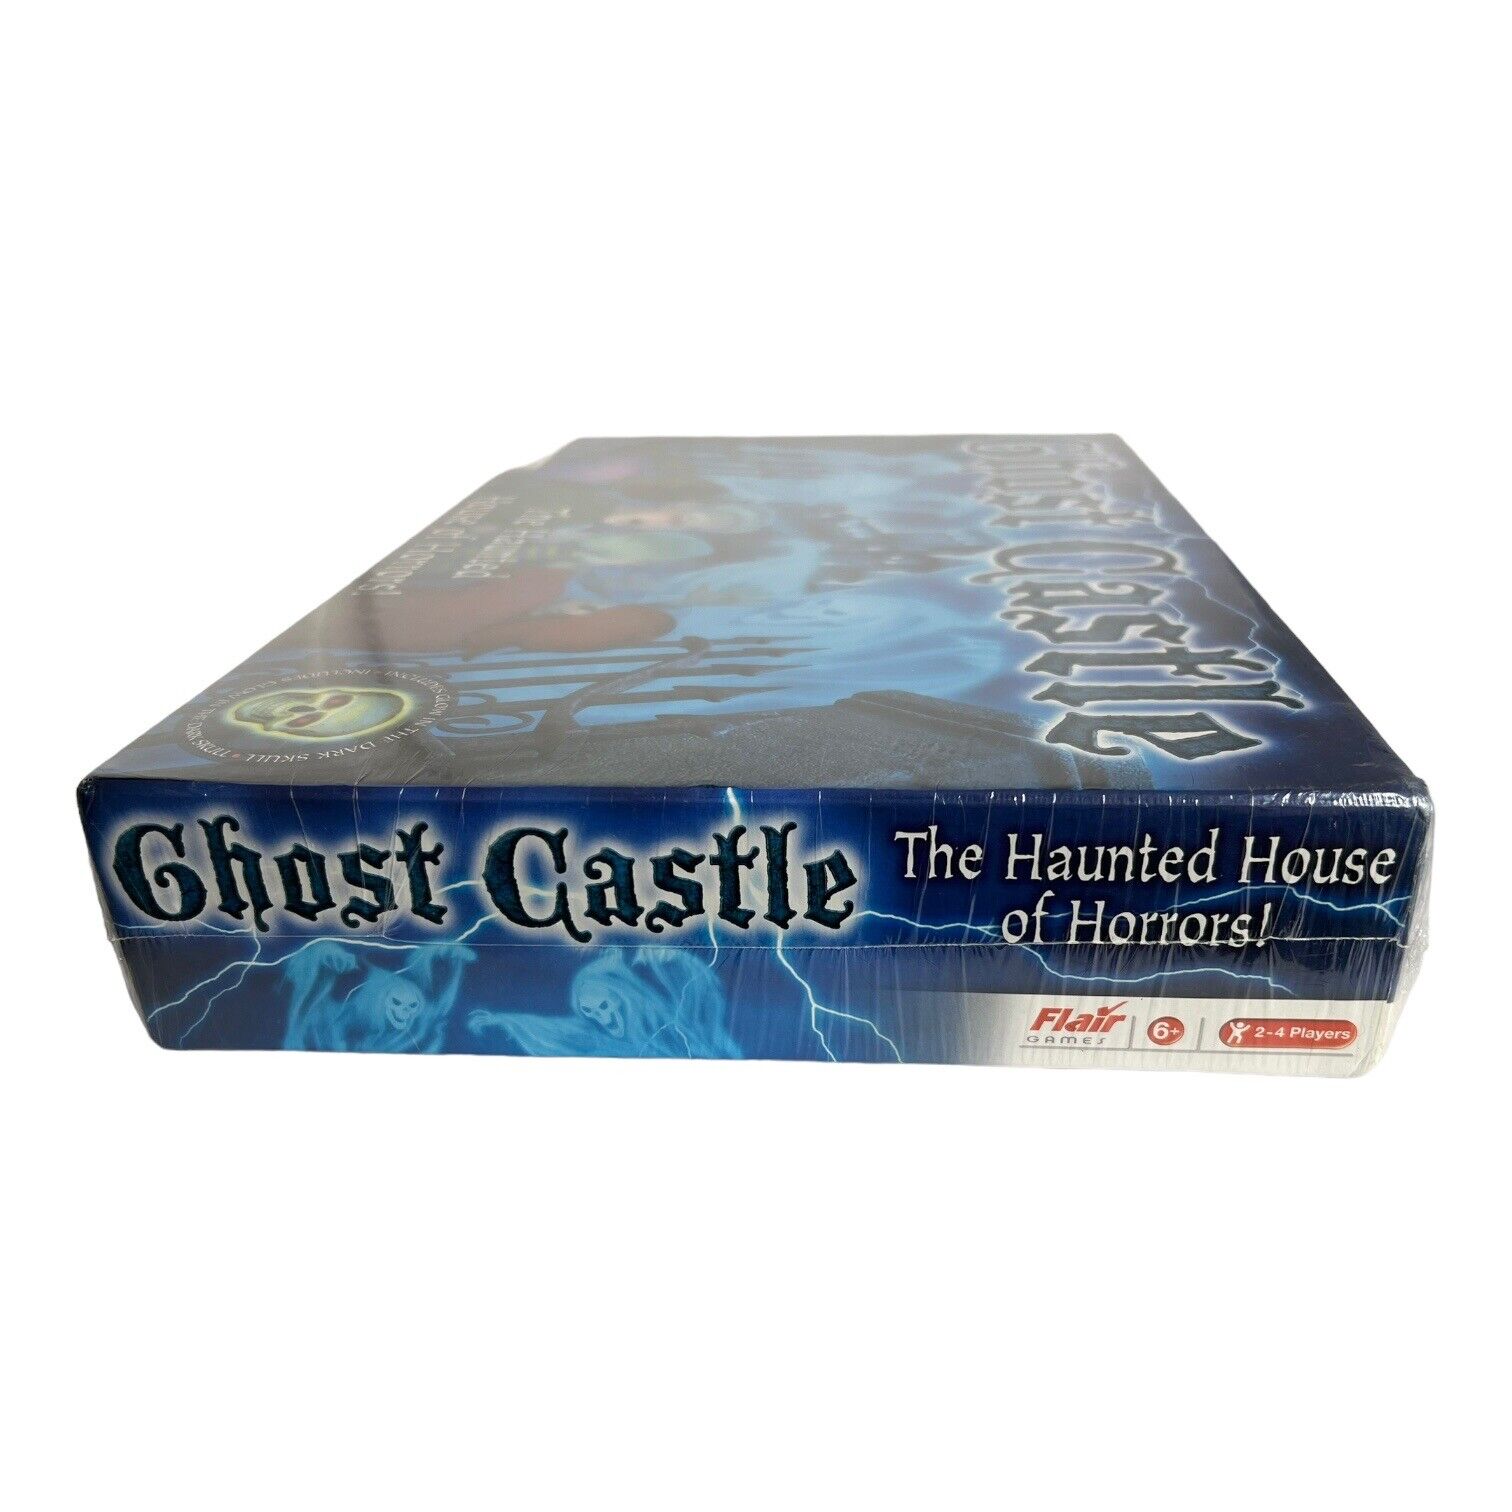 GHOST CASTLE The HAUNTED HOUSE of HORRORS NEW Factory SEALED BOARD GAME Flair ! Flaire Leisure Products Items # 36000 - фотография #22